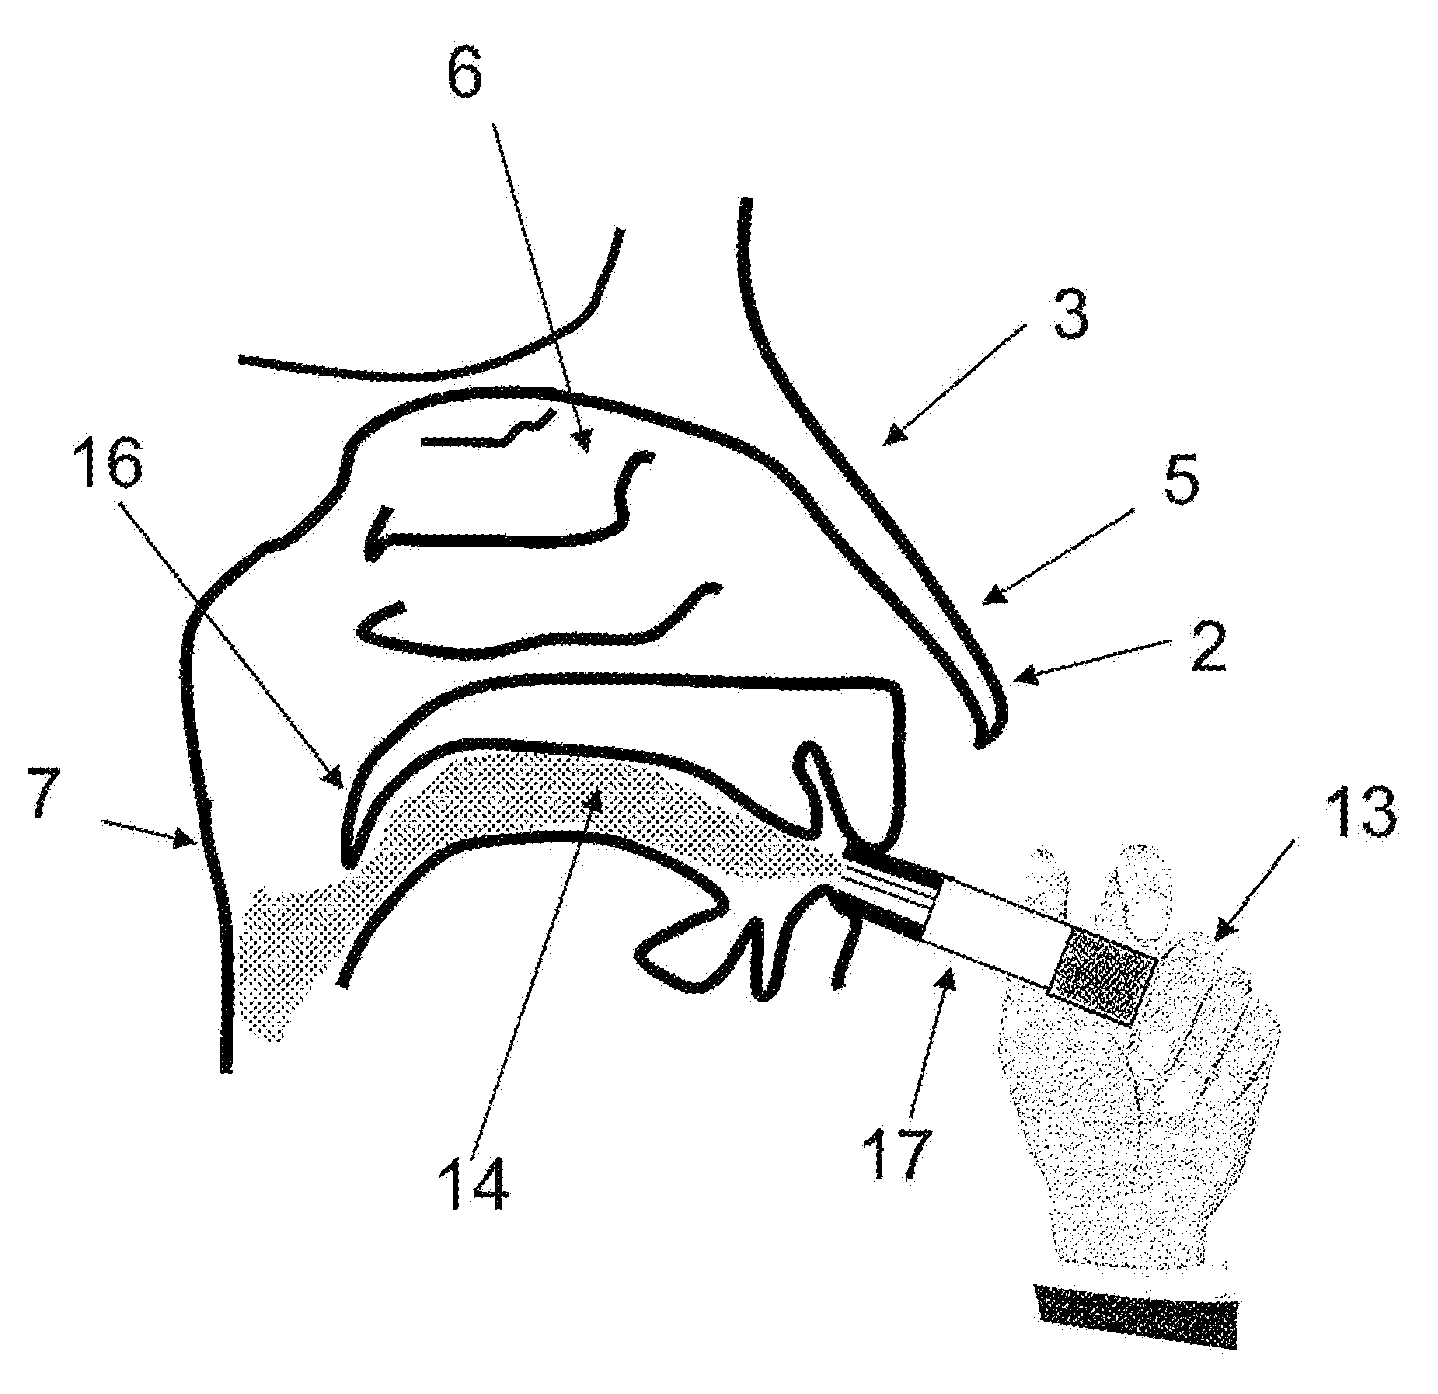 Device for oral administration of an aerosol for the rhinopharynx, the nasal cavities or the paranasal sinuses